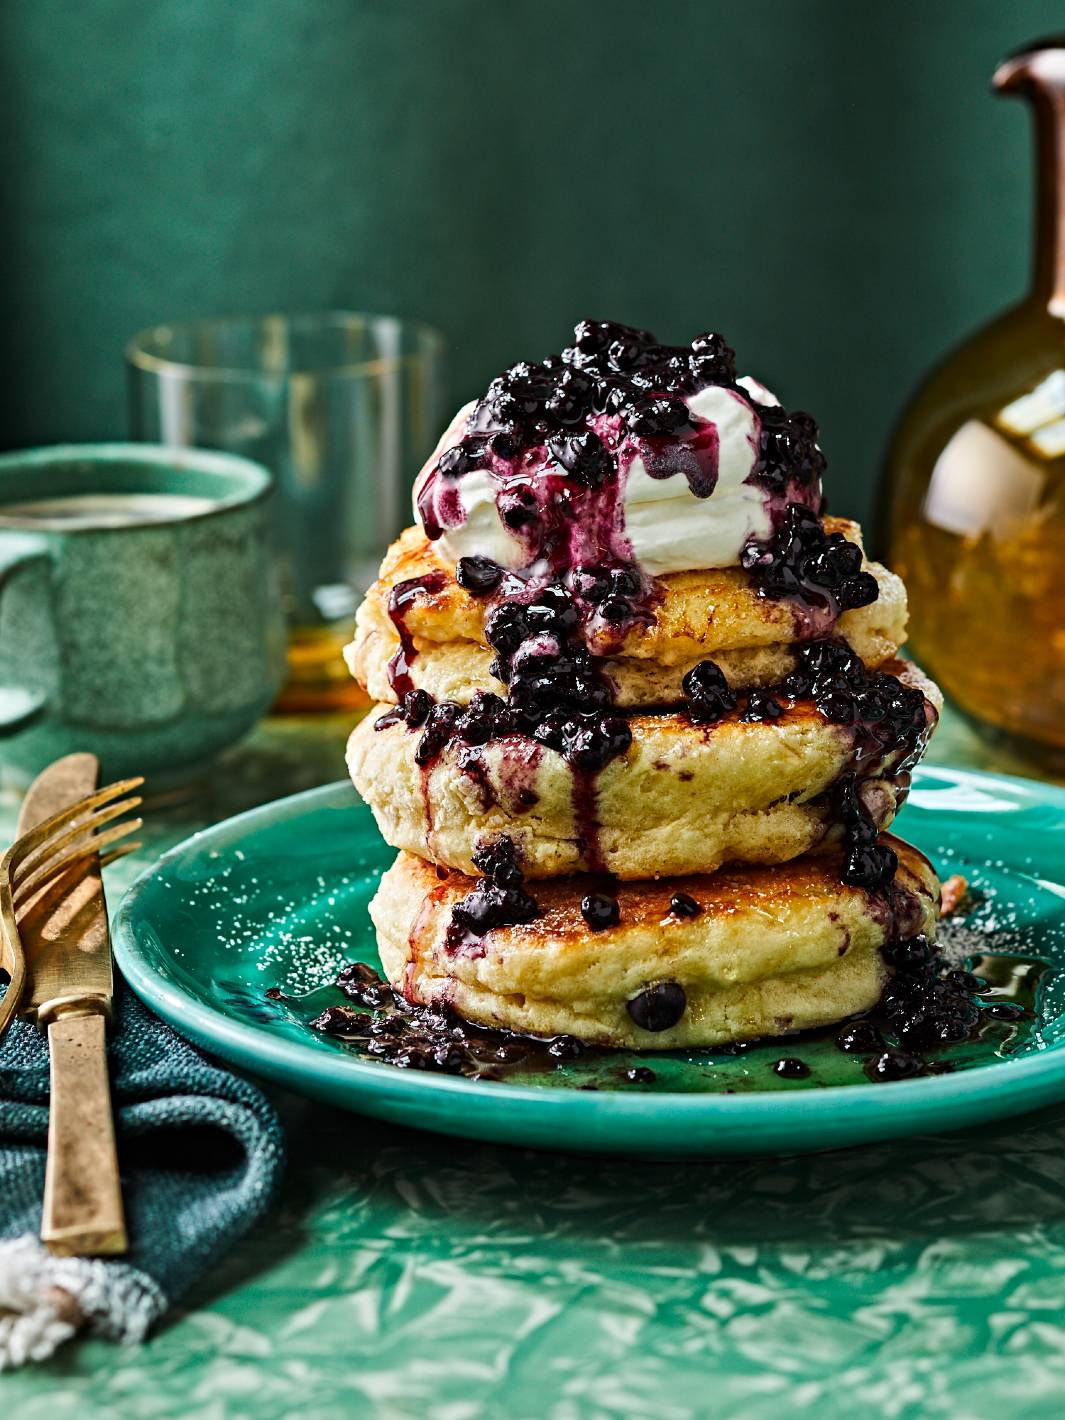 Mildred's Template Kitchen pancake stack with blueberry compote